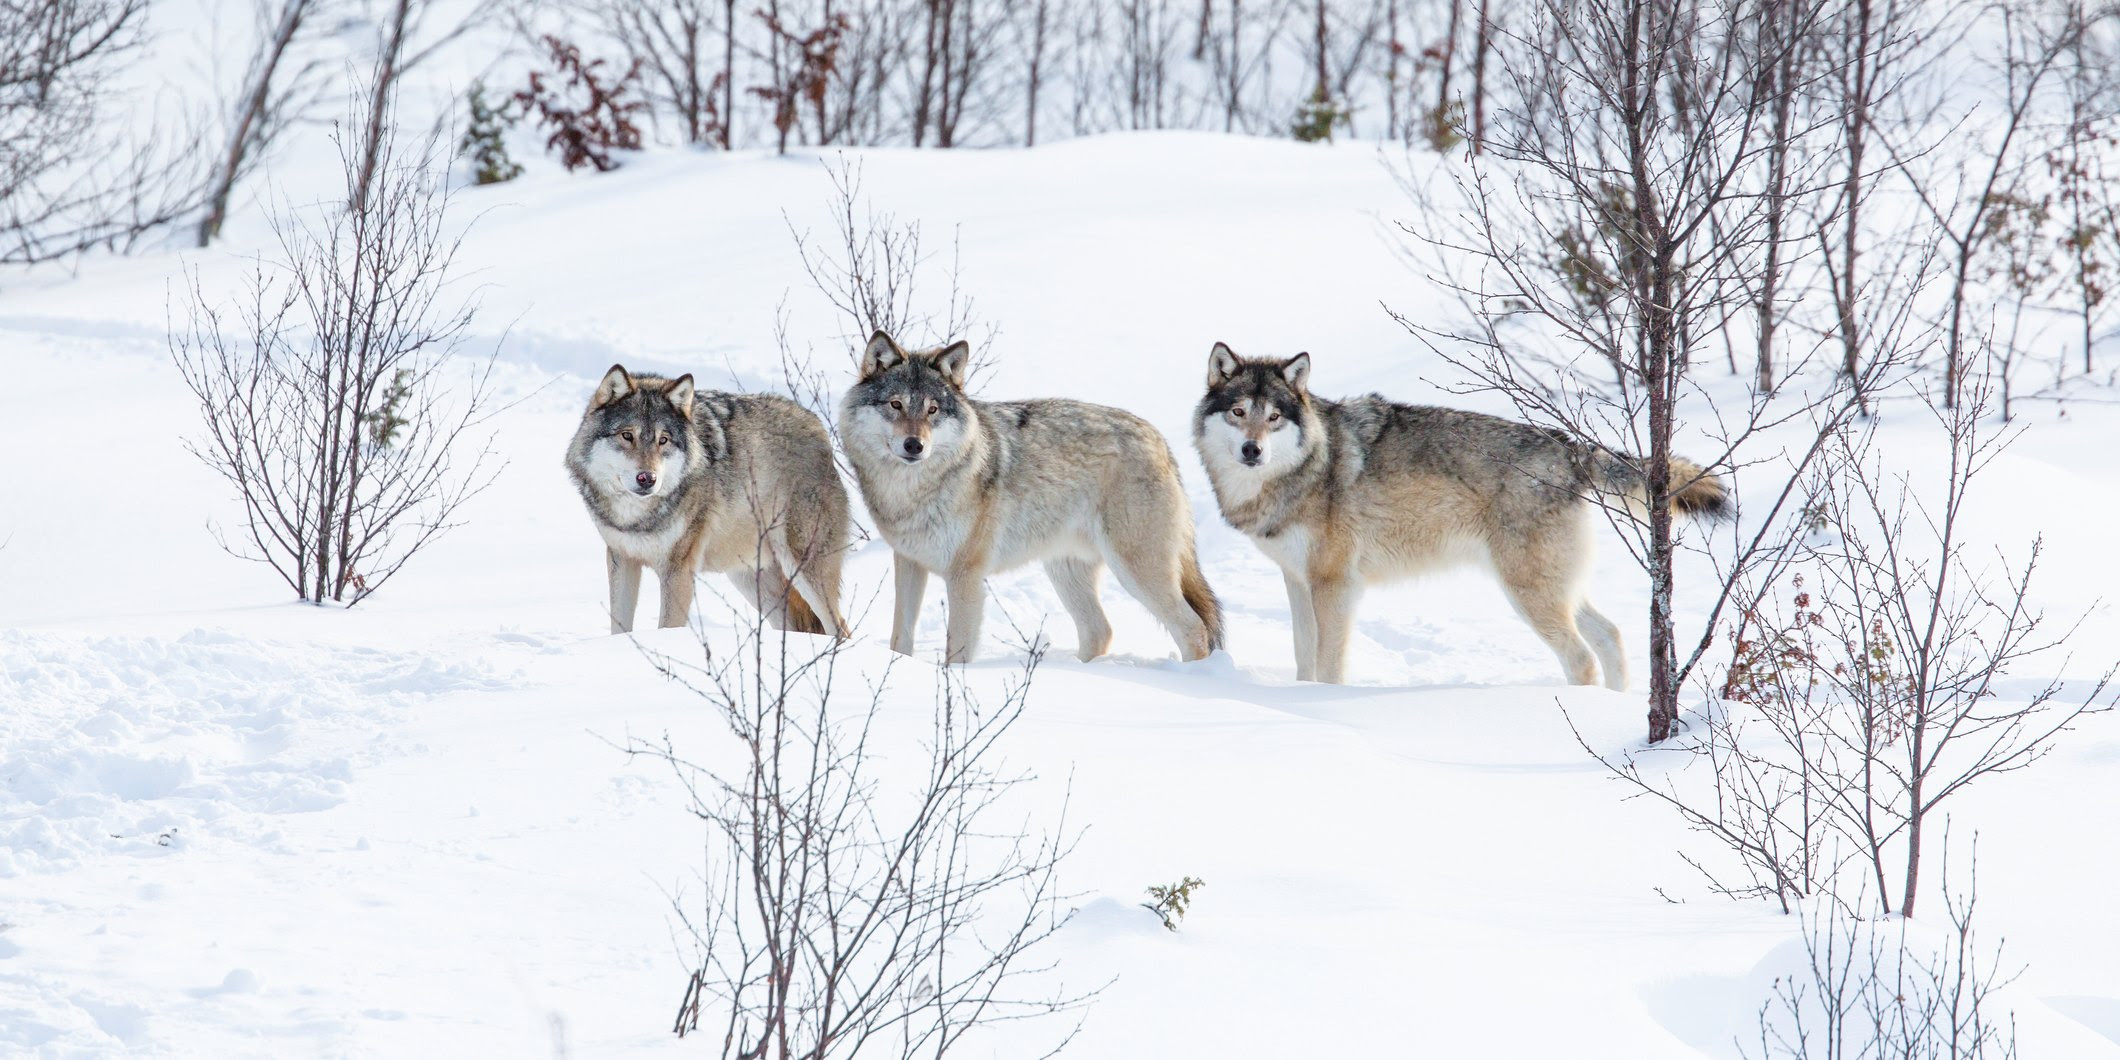 A group of three wolves standing in the snow